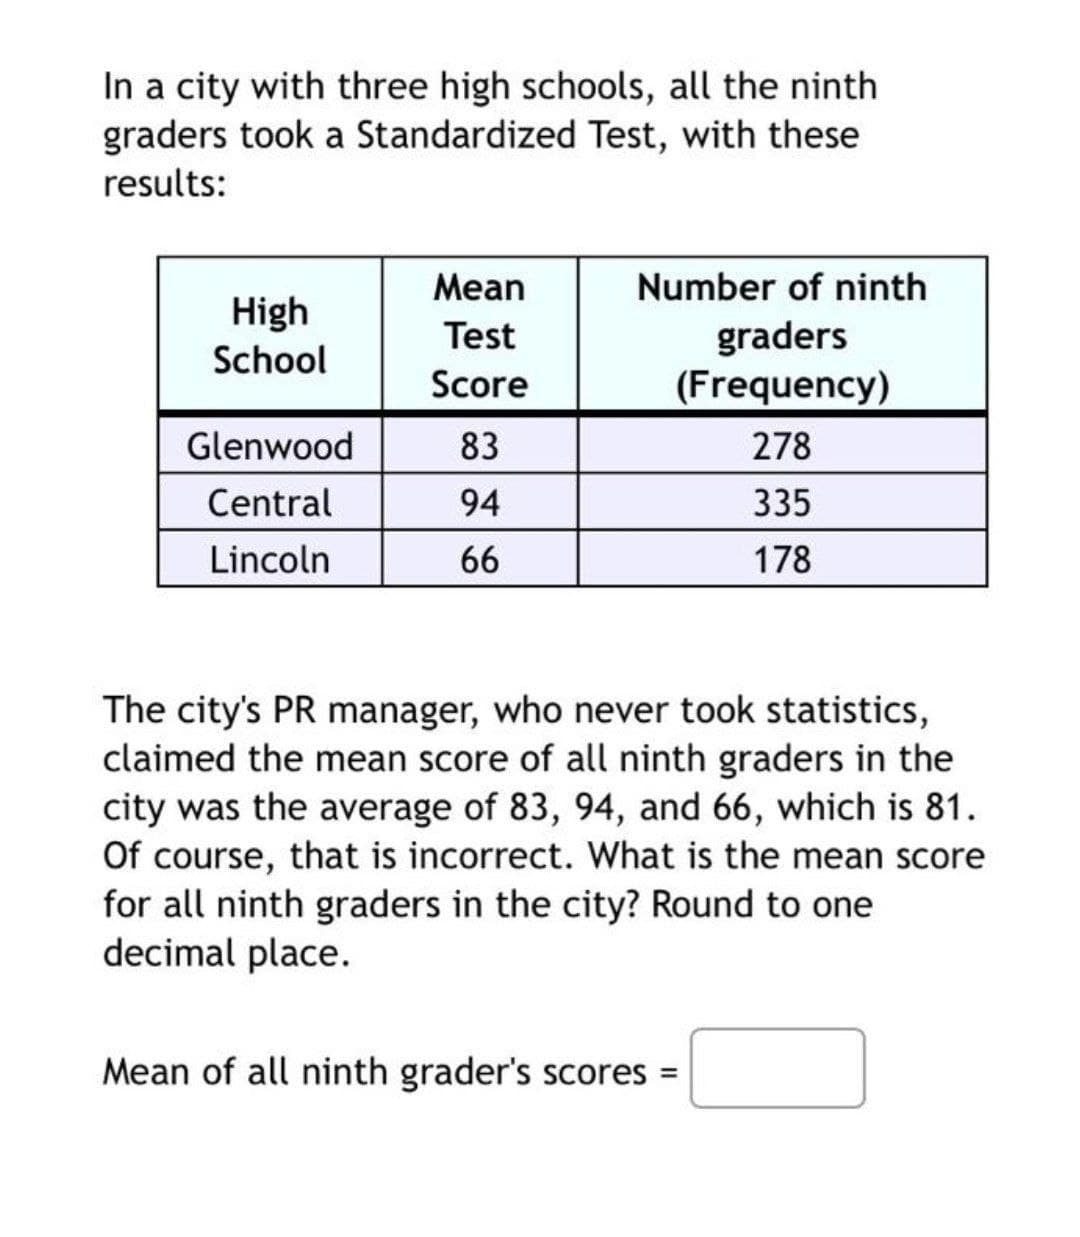 In a city with three high schools, all the ninth
graders took a Standardized Test, with these
results:
Mean
Number of ninth
High
graders
(Frequency)
Test
School
Score
Glenwood
83
278
Central
94
335
Lincoln
66
178
The city's PR manager, who never took statistics,
claimed the mean score of all ninth graders in the
city was the average of 83, 94, and 66, which is 81.
Of course, that is incorrect. What is the mean score
for all ninth graders in the city? Round to one
decimal place.
Mean of all ninth grader's scores
